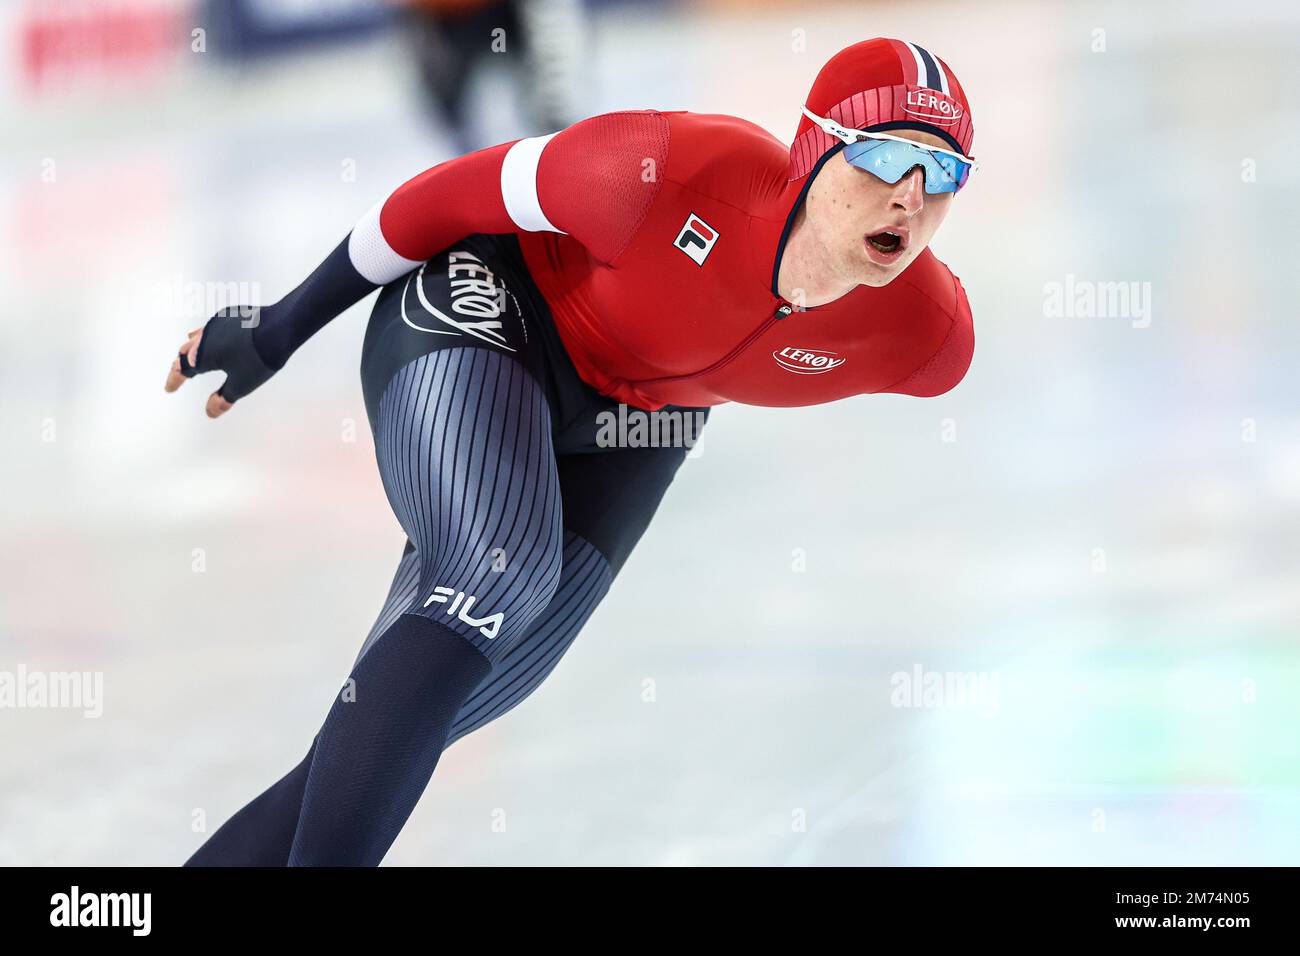 HAMAR - Sander Eitrem (NOR) in the men's 5000 meters all-around during the  ISU European Speed Skating Championships at the Hamar Olympic Hall on  January 7, 2023 in Hamar, Norway. ANP VINCENT